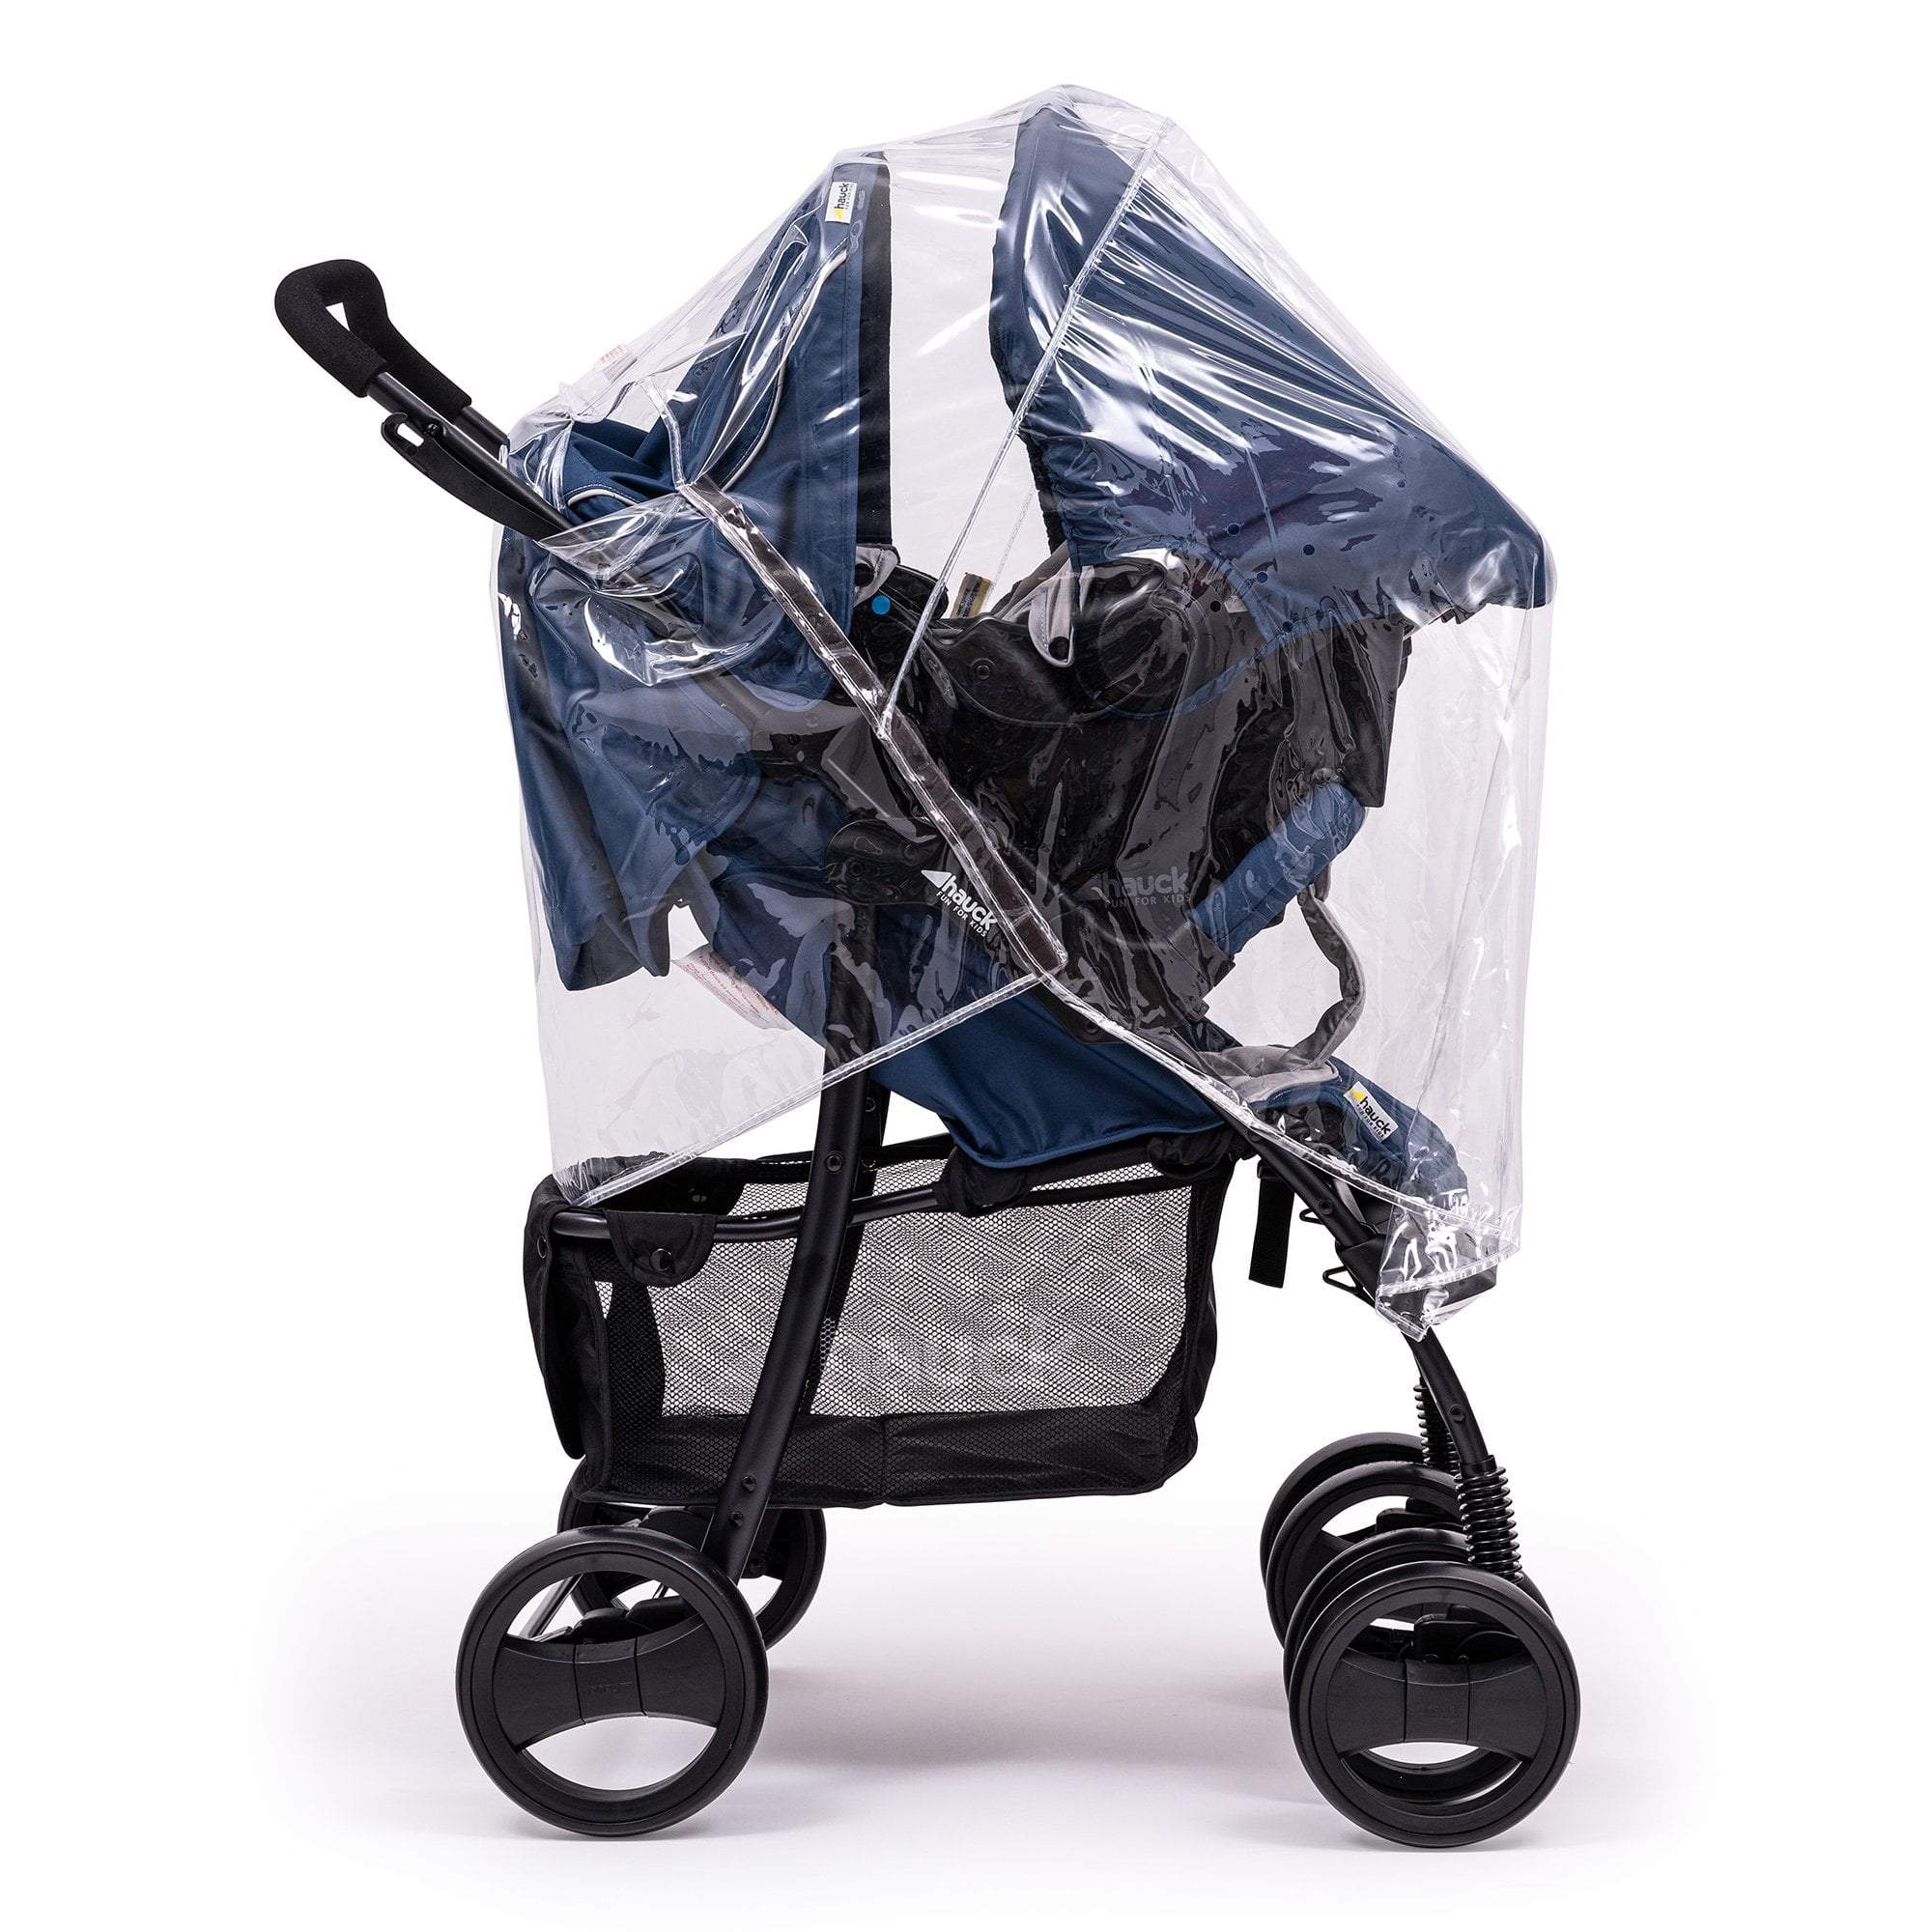 Travel System Raincover Compatible with Baby Weavers - Fits All Models -  | For Your Little One